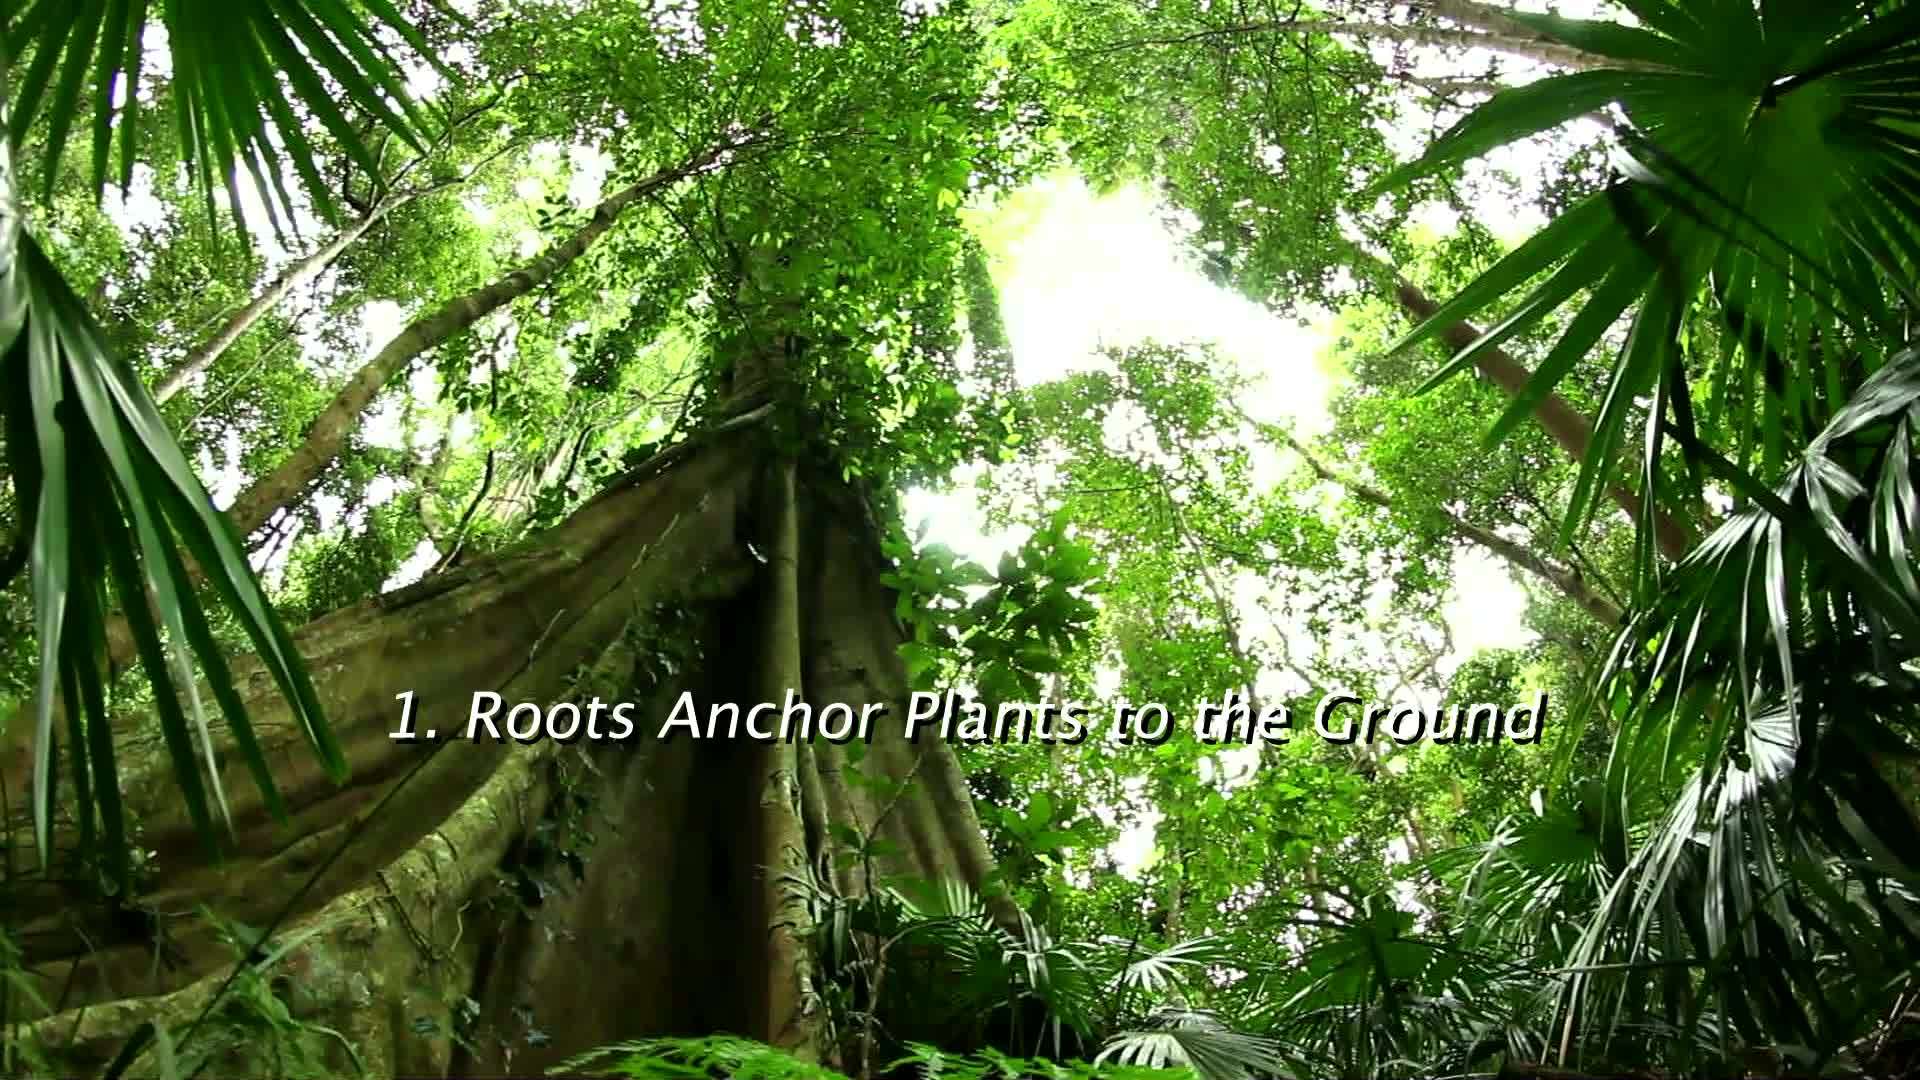 The Roots of Plants